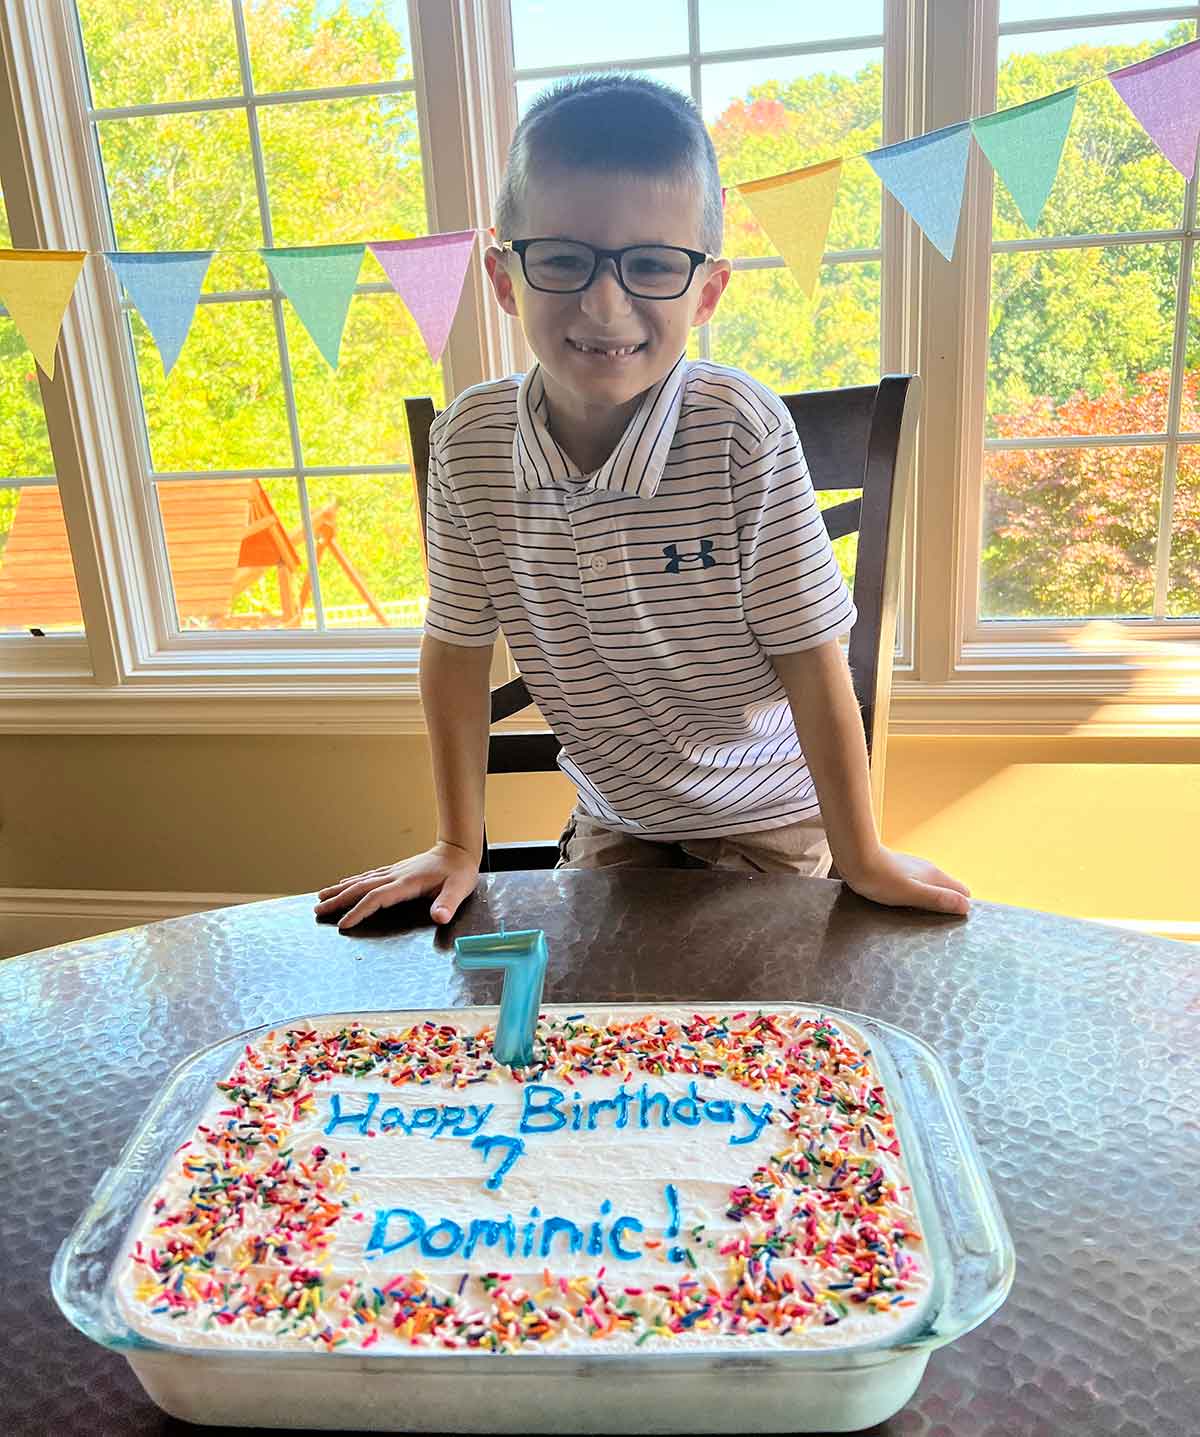 Boy in a striped polo shirt leaning over a birthday cake with a number 7 candle on it.